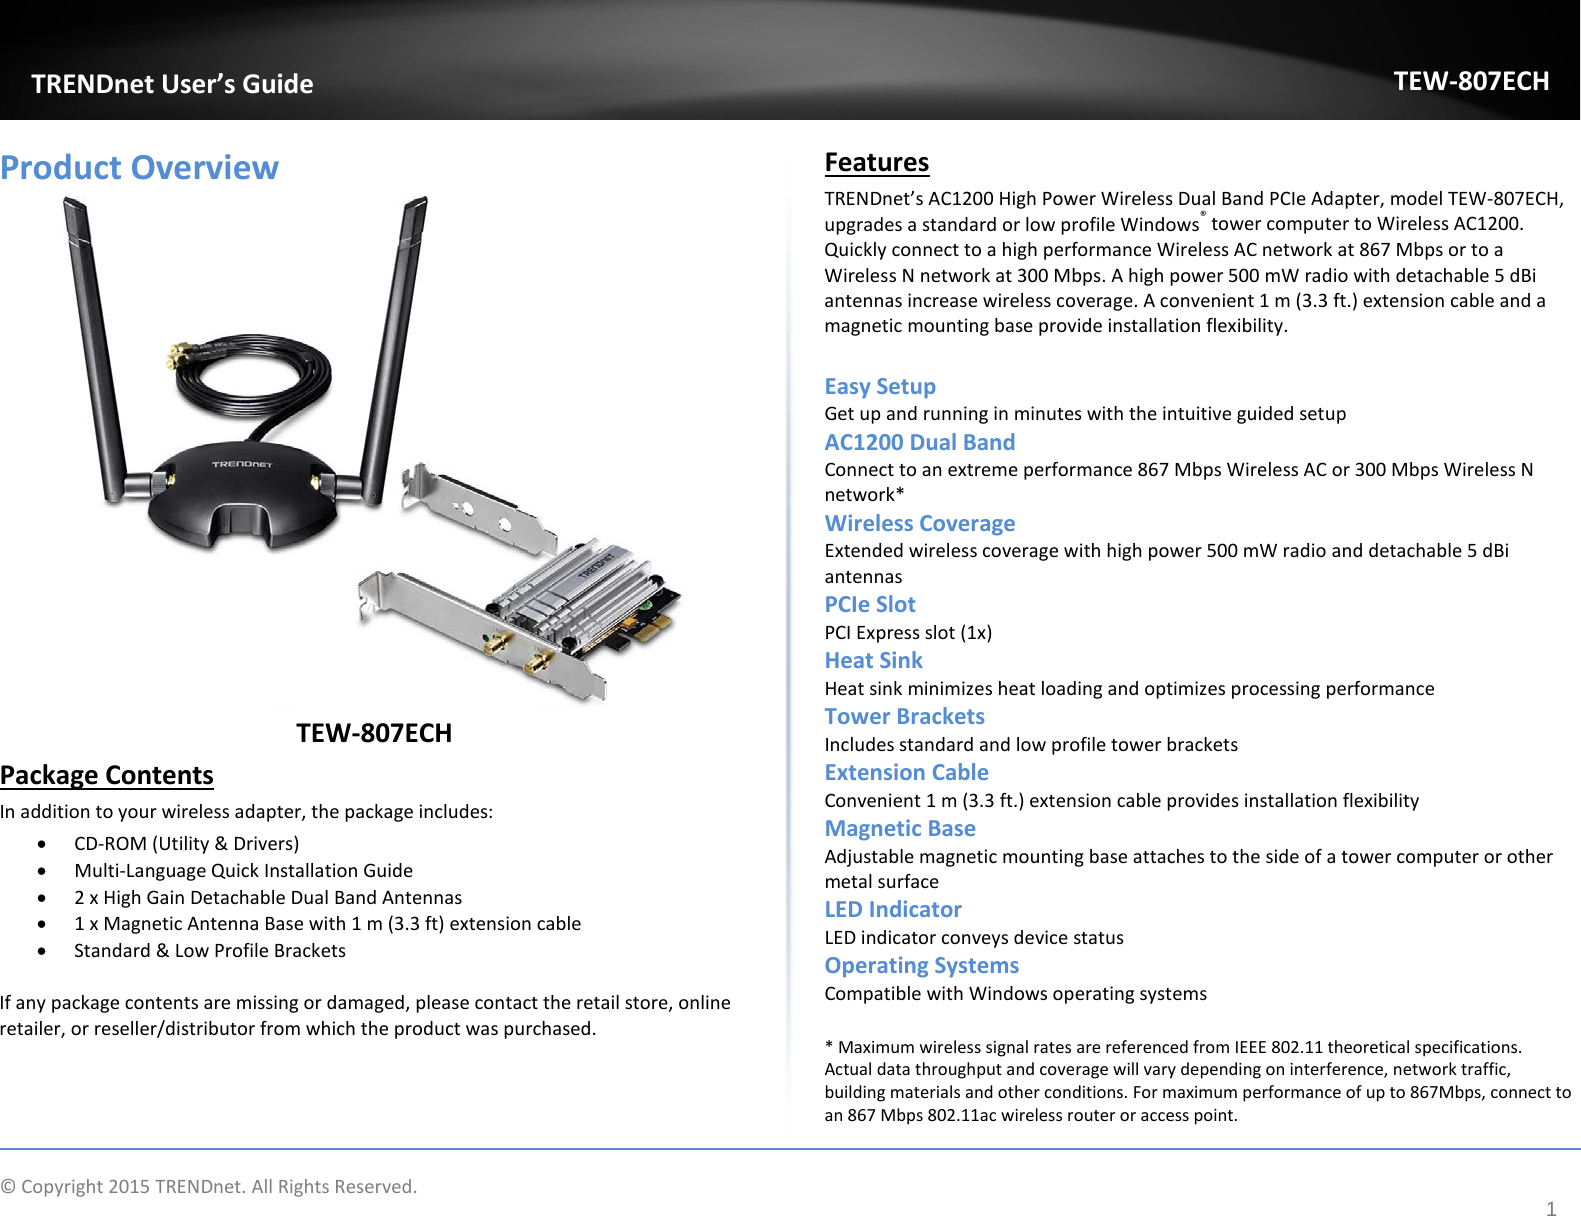              © Copyright 2015 TRENDnet. All Rights Reserved.       TRENDnet User’s Guide TEW-807ECH 1 Product Overview  TEW-807ECH Package Contents In addition to your wireless adapter, the package includes: • CD-ROM (Utility &amp; Drivers) • Multi-Language Quick Installation Guide • 2 x High Gain Detachable Dual Band Antennas • 1 x Magnetic Antenna Base with 1 m (3.3 ft) extension cable • Standard &amp; Low Profile Brackets  If any package contents are missing or damaged, please contact the retail store, online retailer, or reseller/distributor from which the product was purchased. Features TRENDnet’s AC1200 High Power Wireless Dual Band PCIe Adapter, model TEW-807ECH, upgrades a standard or low profile Windows® tower computer to Wireless AC1200. Quickly connect to a high performance Wireless AC network at 867 Mbps or to a Wireless N network at 300 Mbps. A high power 500 mW radio with detachable 5 dBi antennas increase wireless coverage. A convenient 1 m (3.3 ft.) extension cable and a magnetic mounting base provide installation flexibility.   Easy Setup Get up and running in minutes with the intuitive guided setup AC1200 Dual Band Connect to an extreme performance 867 Mbps Wireless AC or 300 Mbps Wireless N network* Wireless Coverage Extended wireless coverage with high power 500 mW radio and detachable 5 dBi antennas PCIe Slot  PCI Express slot (1x) Heat Sink  Heat sink minimizes heat loading and optimizes processing performance  Tower Brackets Includes standard and low profile tower brackets Extension Cable  Convenient 1 m (3.3 ft.) extension cable provides installation flexibility   Magnetic Base Adjustable magnetic mounting base attaches to the side of a tower computer or other metal surface LED Indicator  LED indicator conveys device status  Operating Systems Compatible with Windows operating systems * Maximum wireless signal rates are referenced from IEEE 802.11 theoretical specifications. Actual data throughput and coverage will vary depending on interference, network traffic, building materials and other conditions. For maximum performance of up to 867Mbps, connect to an 867 Mbps 802.11ac wireless router or access point. 